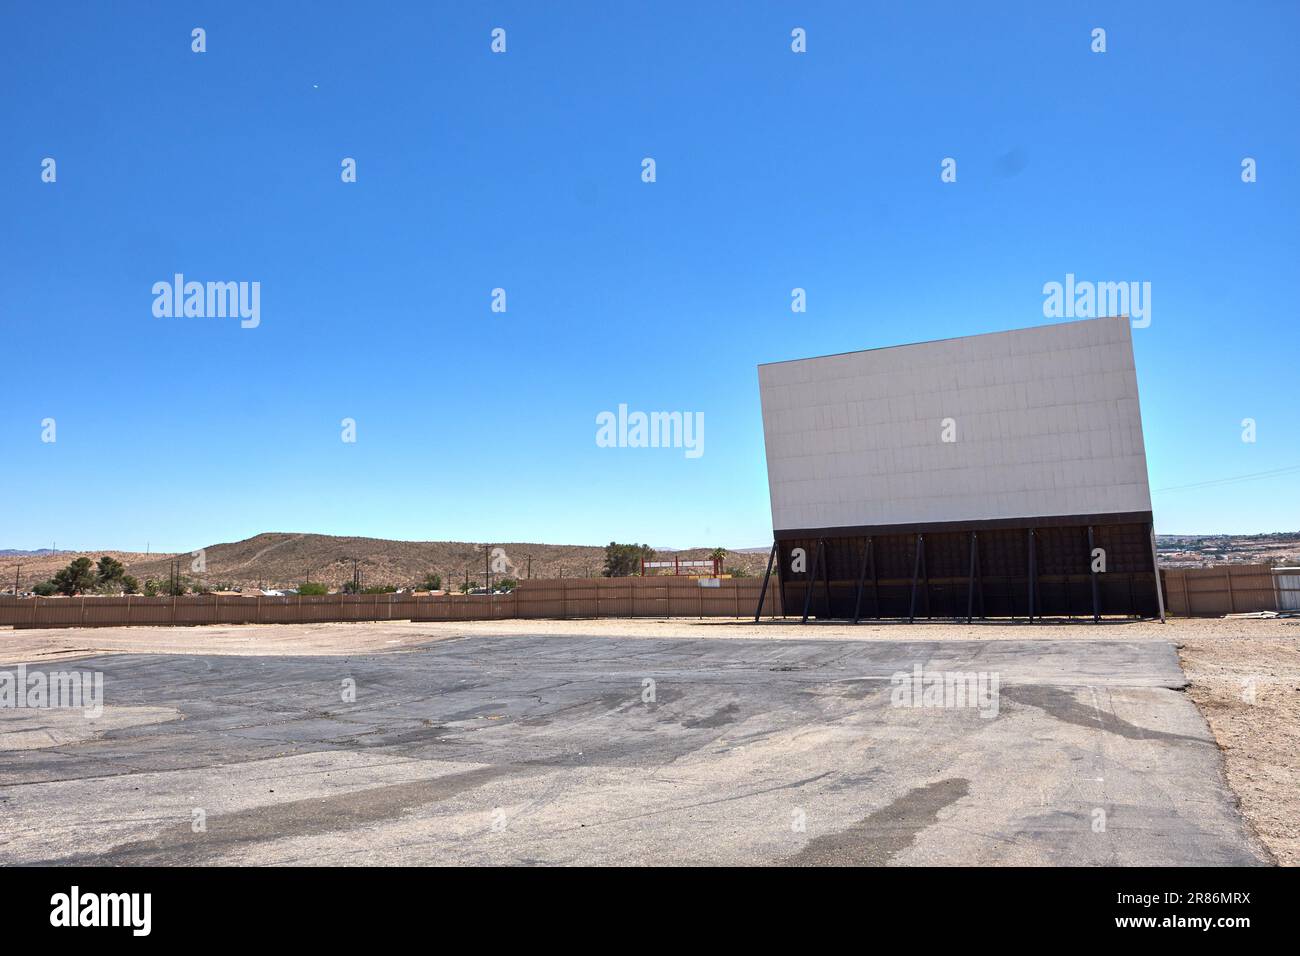 Barstow, California, USA. 20th June, 2018. The Skyline Drive-in theater  opened in 1996. Now it has 2 screens, a snack bar and parking for 600 cars.  (Credit Image: © Ian L. Sitren/ZUMA